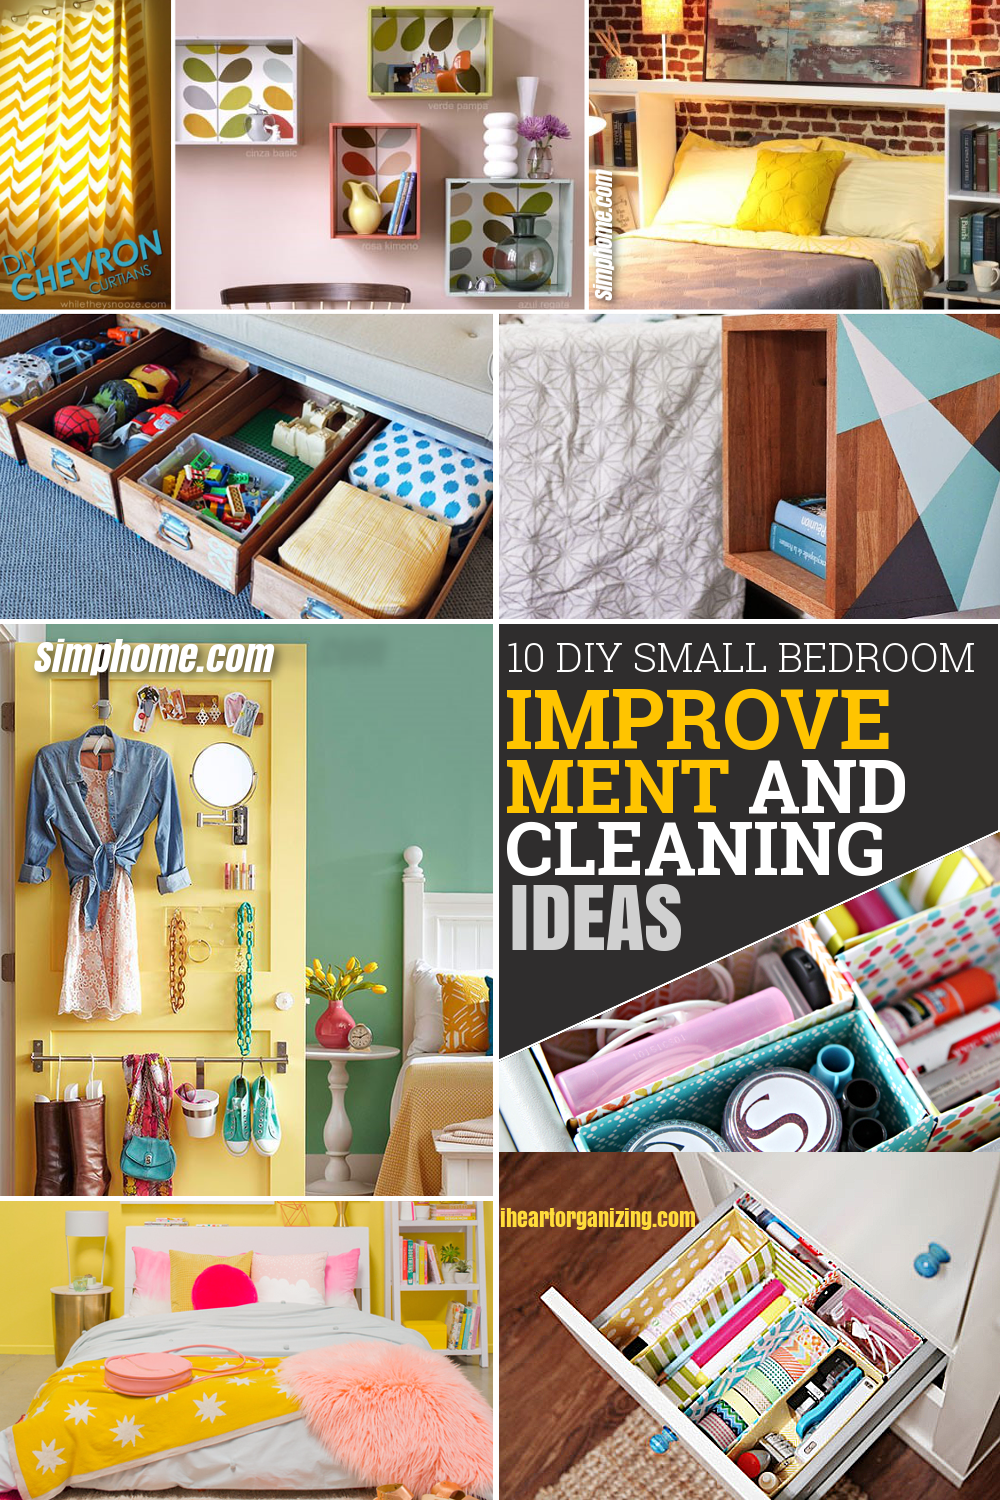 10 DIY Small Bedroom Improvement and Cleaning Ideas - Simphome